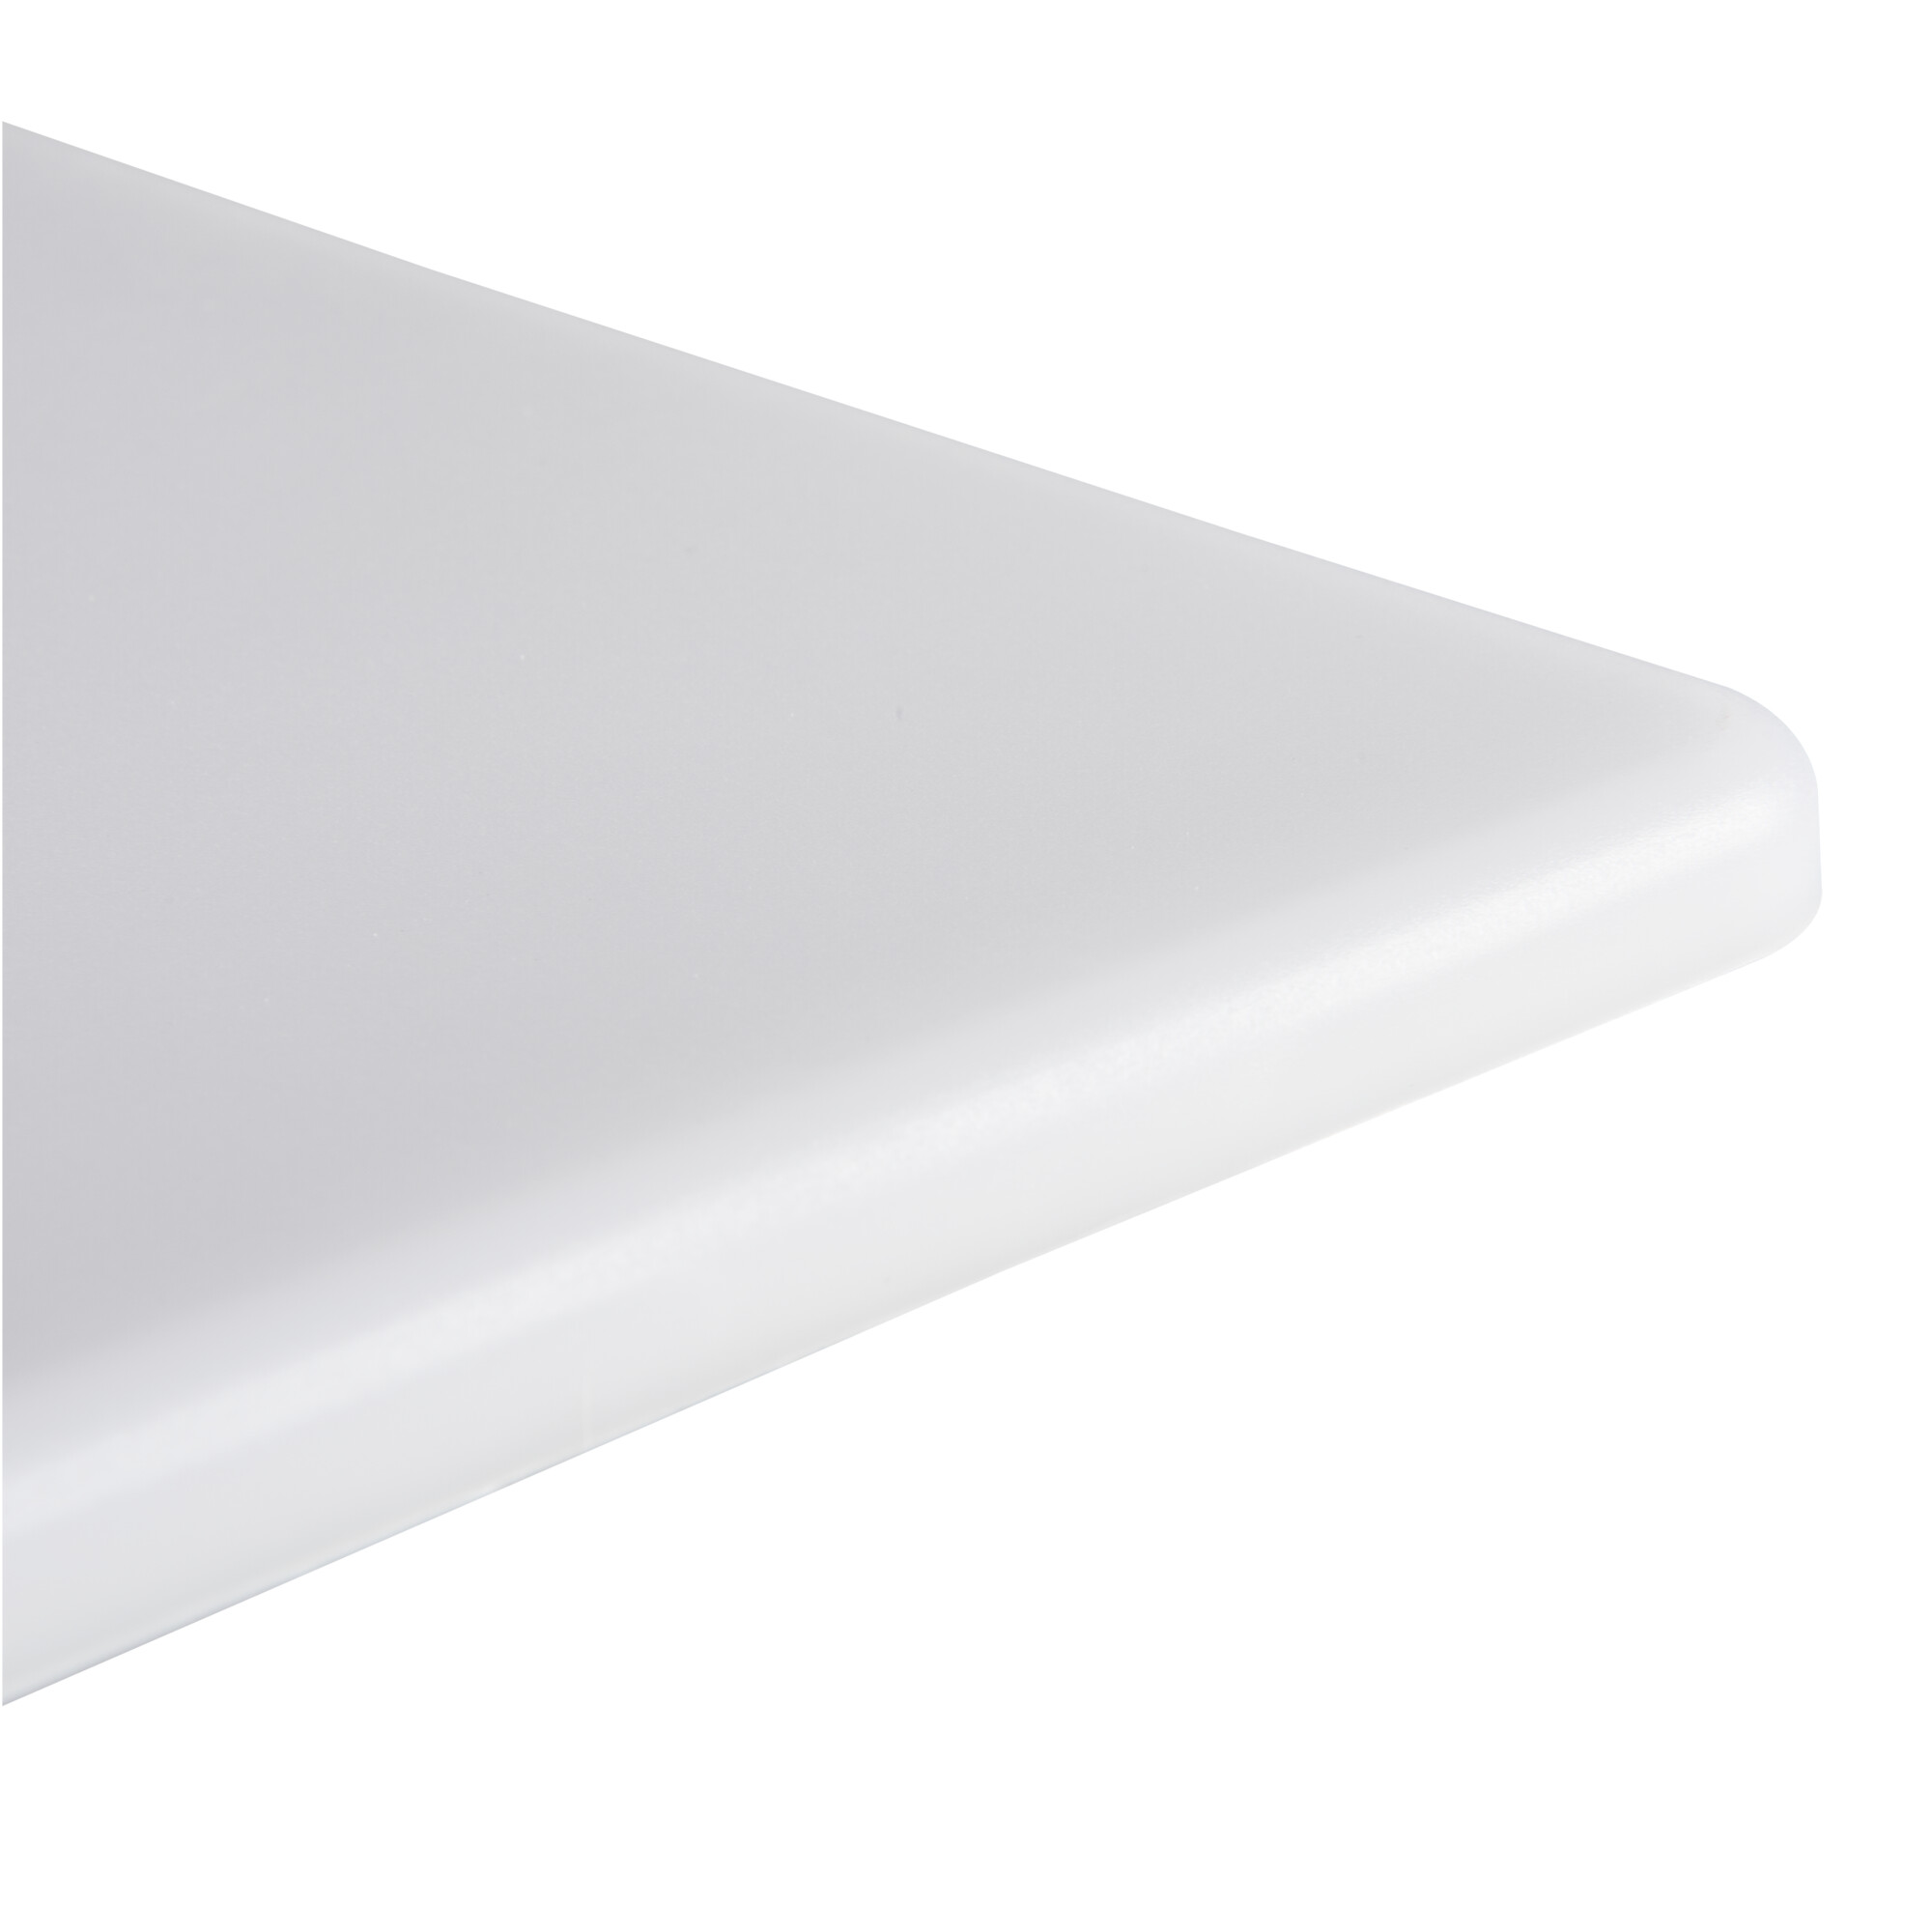 AREL LED DL 14W-NW - KANLUX